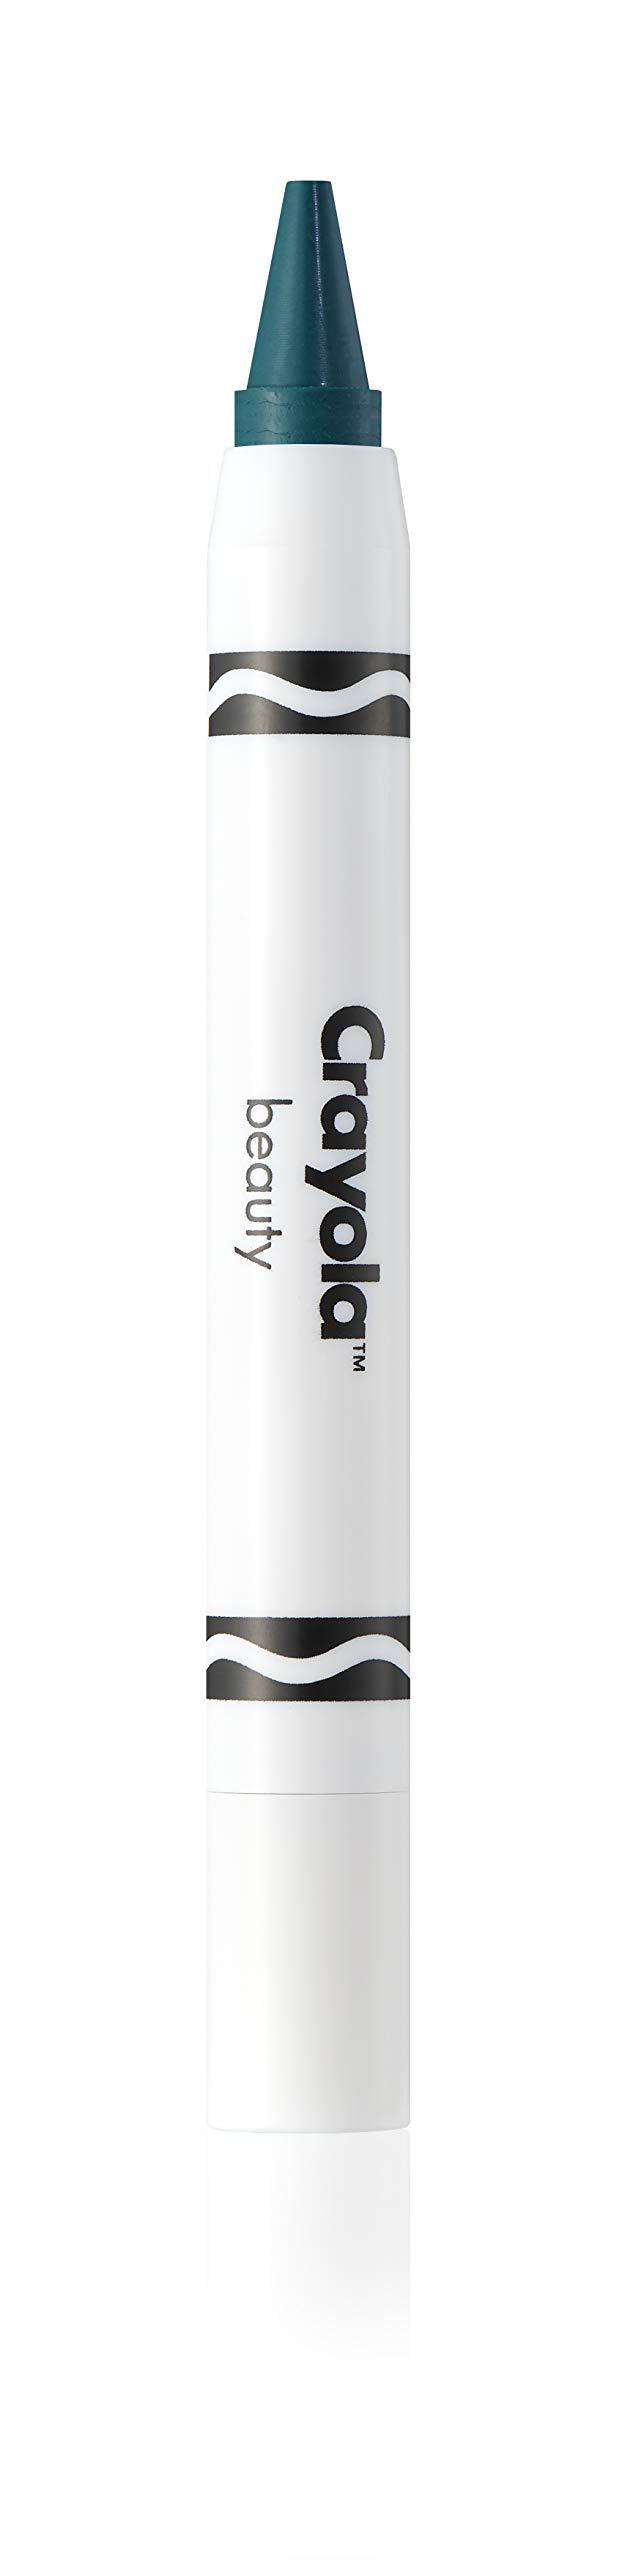 Crayola Beauty - Face Crayon - 3 in 1, Use as Eyeshadow, Lipstick or Blush - Highly Pigmented Color, Ultra Creamy, No Mess - Talc Free & Vegan Friendly - Steel Blue - 0.07 oz - BeesActive Australia